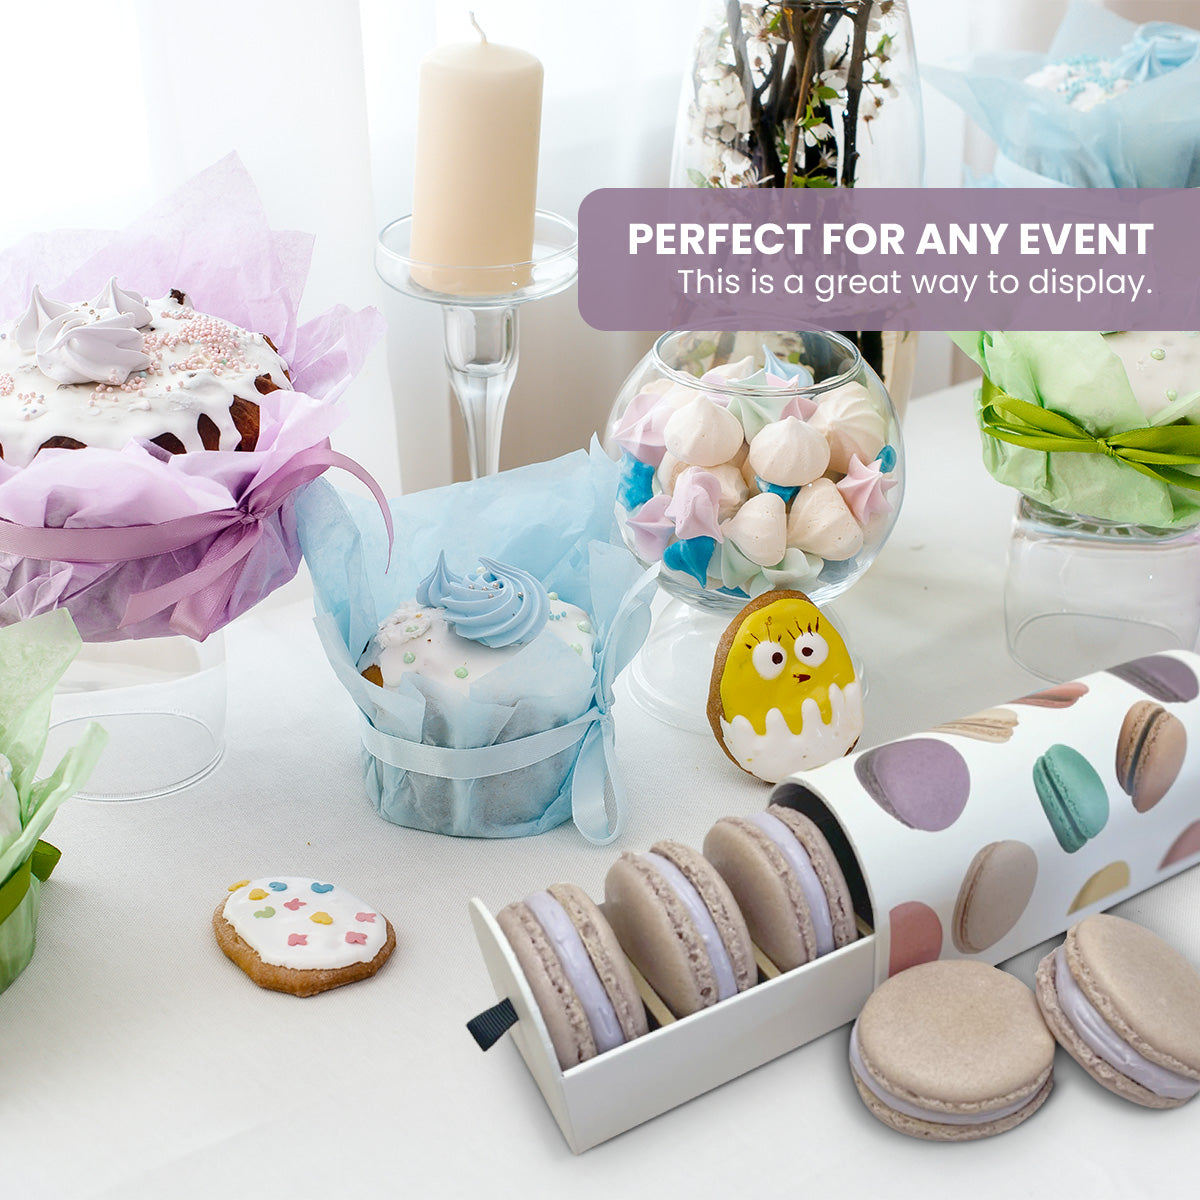 Luxury Macaron Box for Special Events with a Print, Holds 5 Macarons